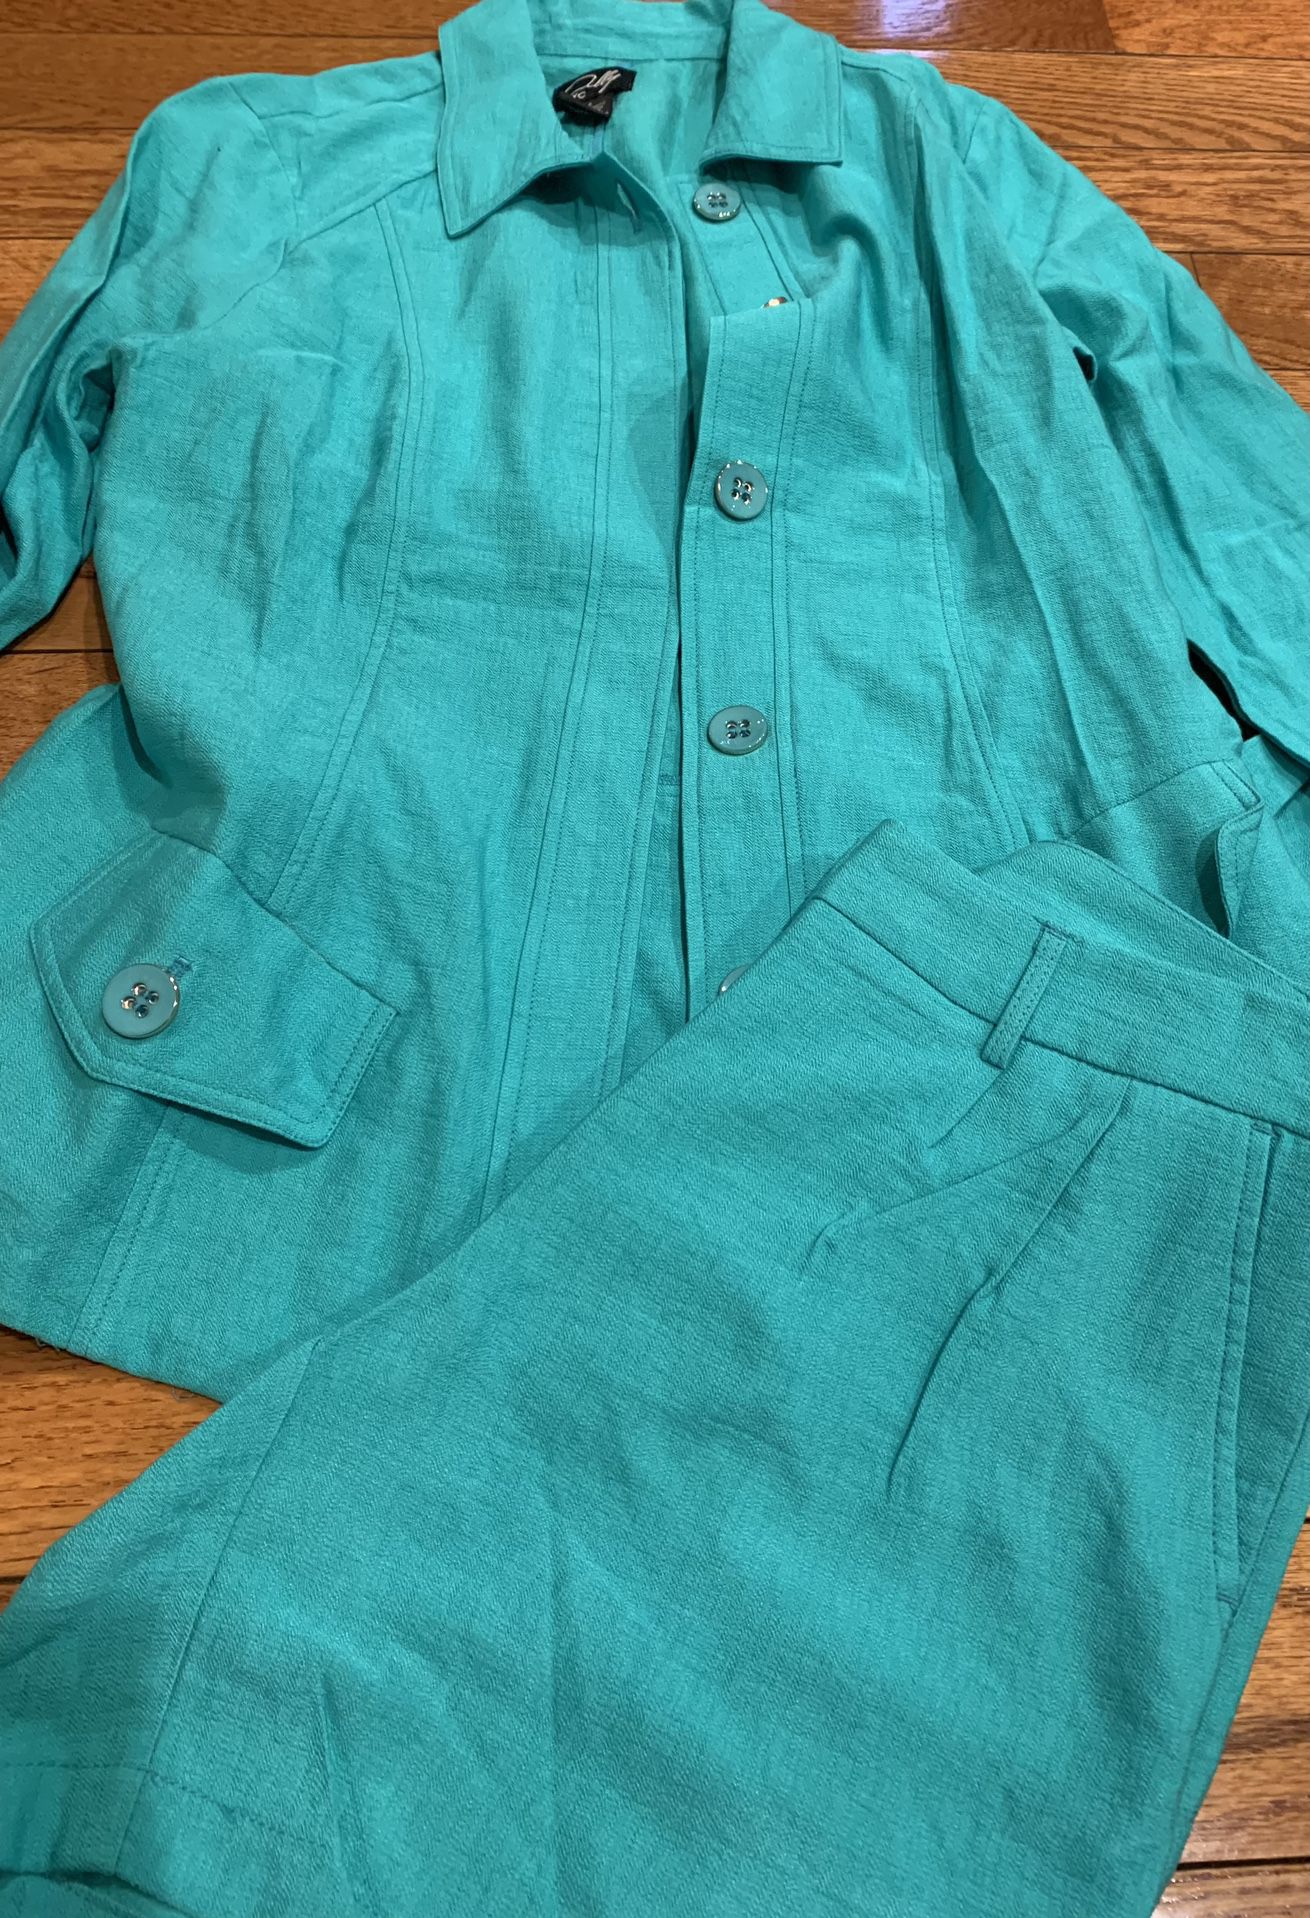 Ally NYC  Brand New women s short suit set COLOR: SEAFOAM size:6 